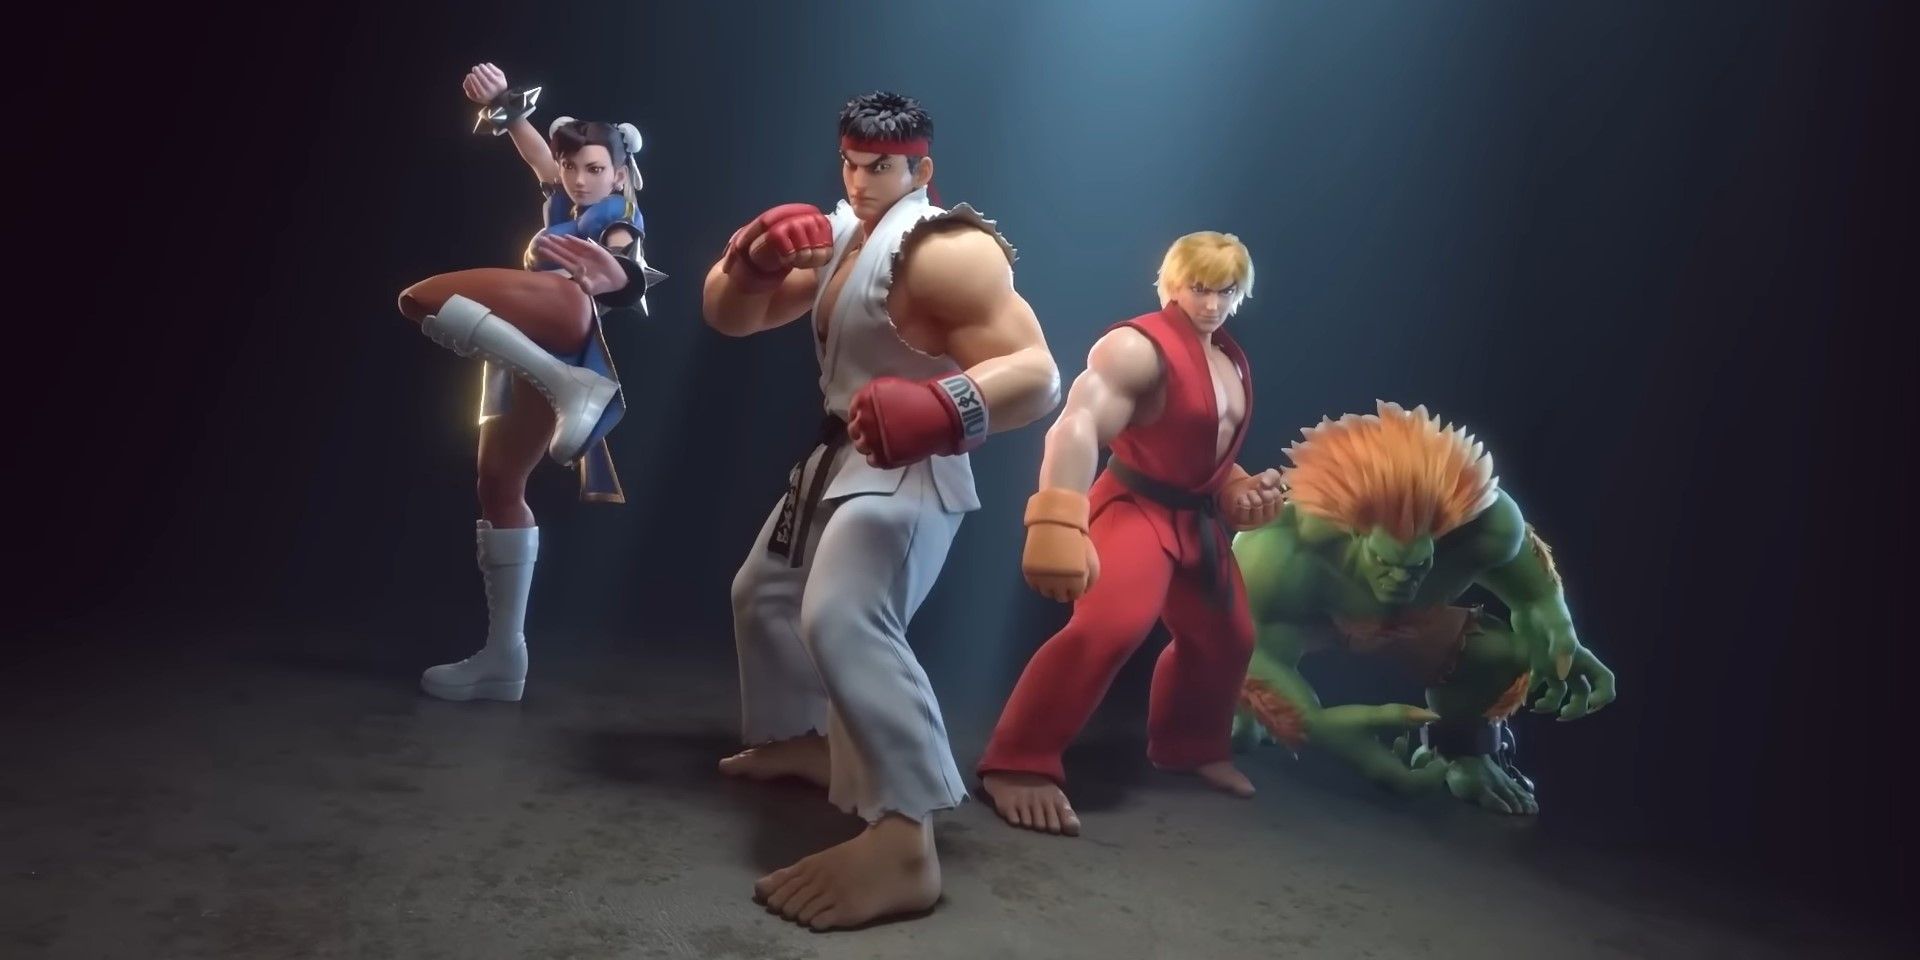 From left to right: Chun Li, Ryu, Ken, and Blanka from Street Fighter Duel posing.